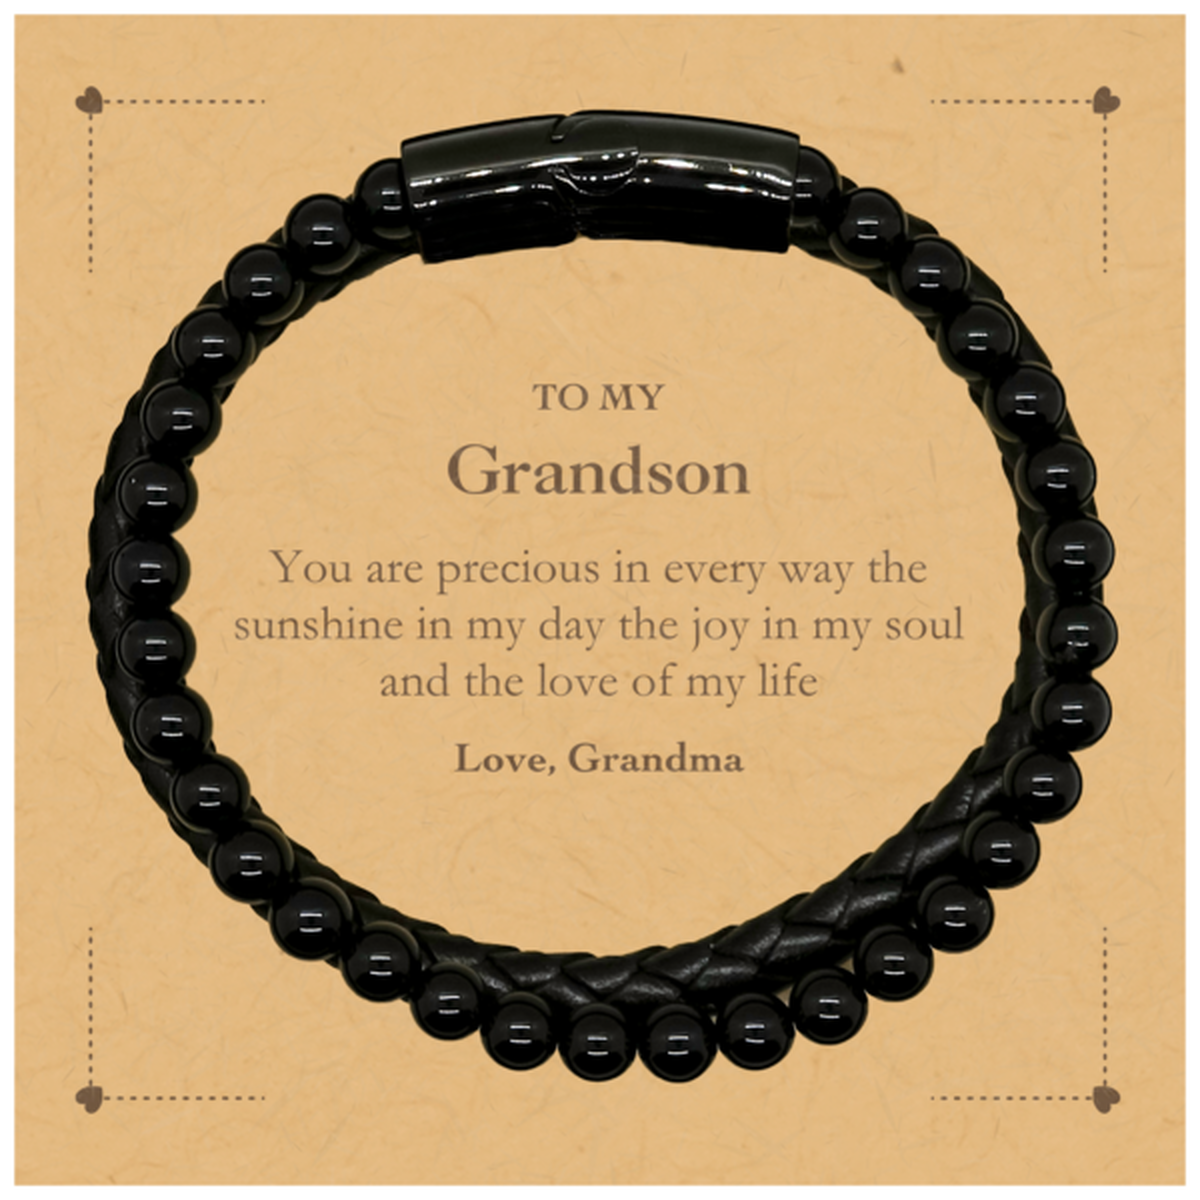 Graduation Gifts for Grandson Stone Leather Bracelets Present from Grandma, Christmas Grandson Birthday Gifts Grandson You are precious in every way the sunshine in my day. Love, Grandma